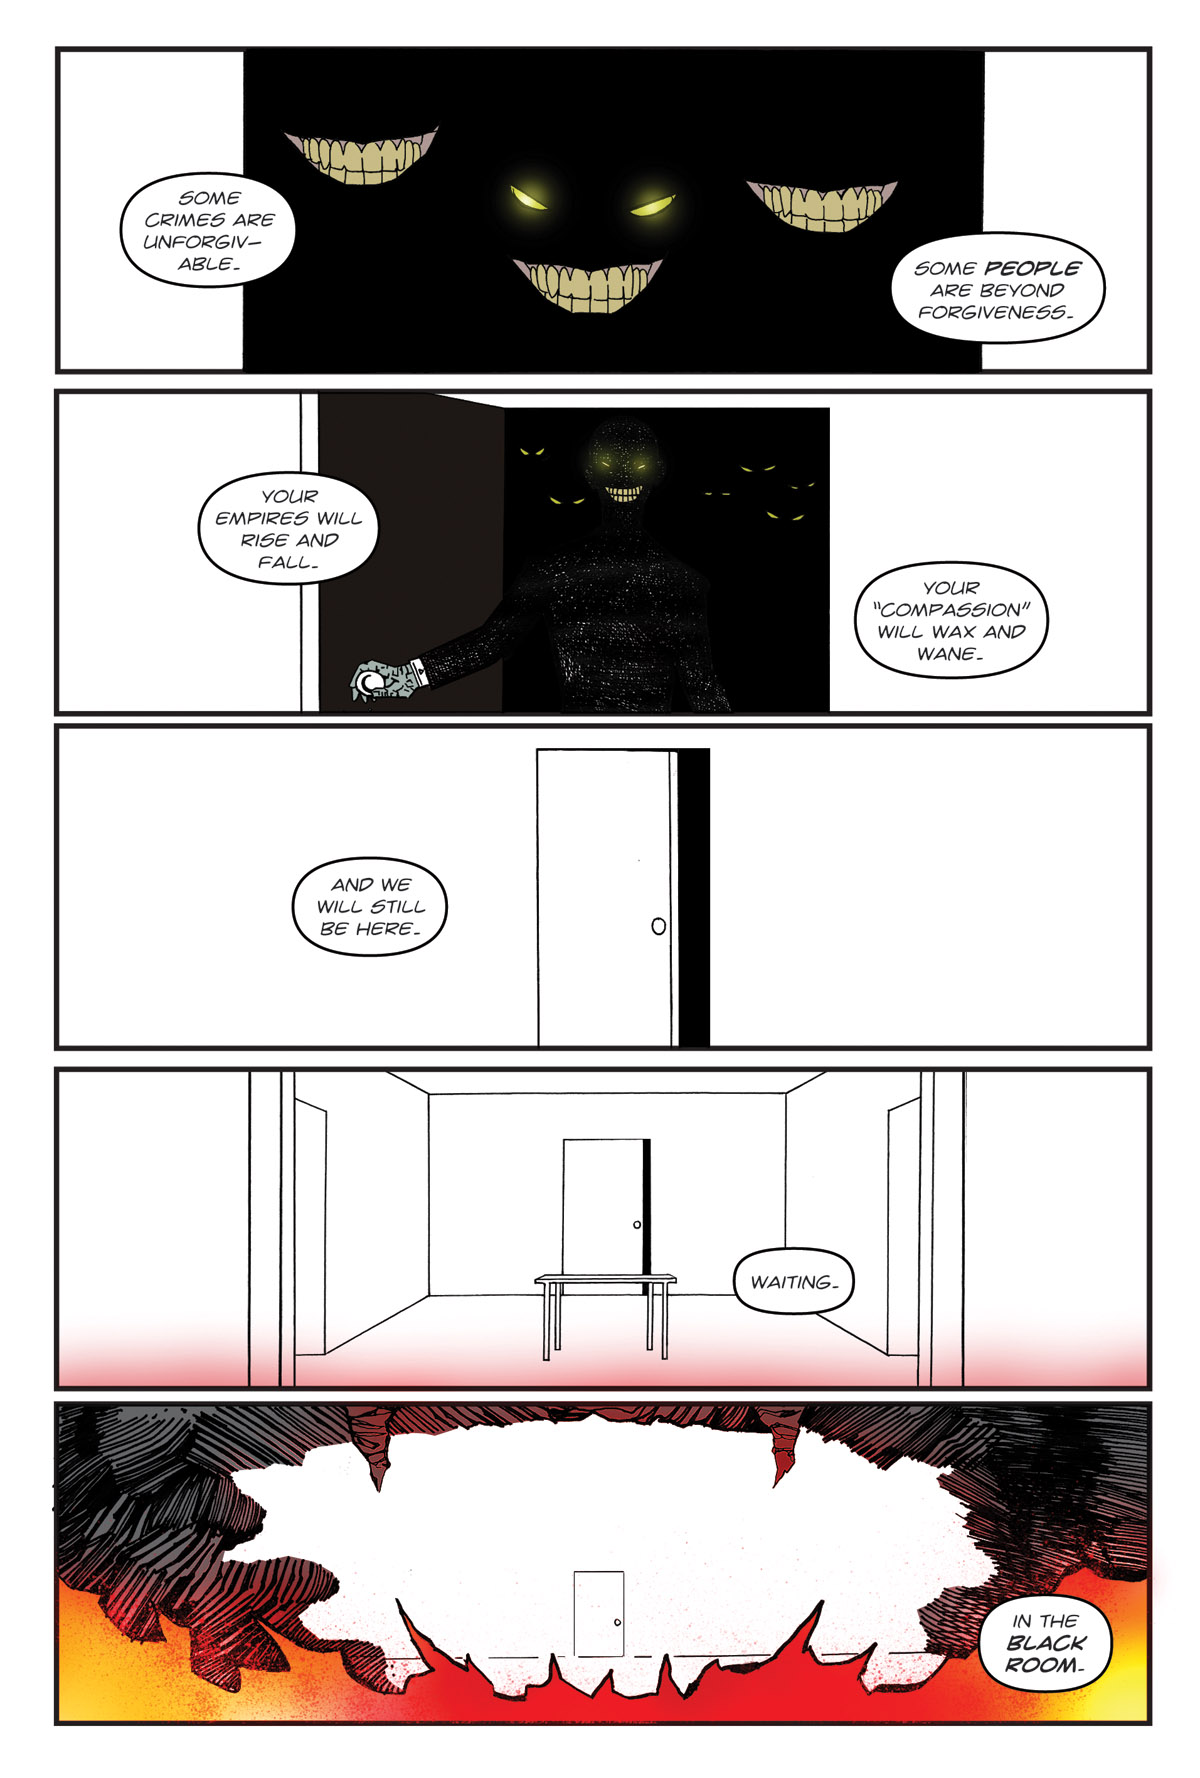 Afterlife Inc. | The Black Room | Page 2